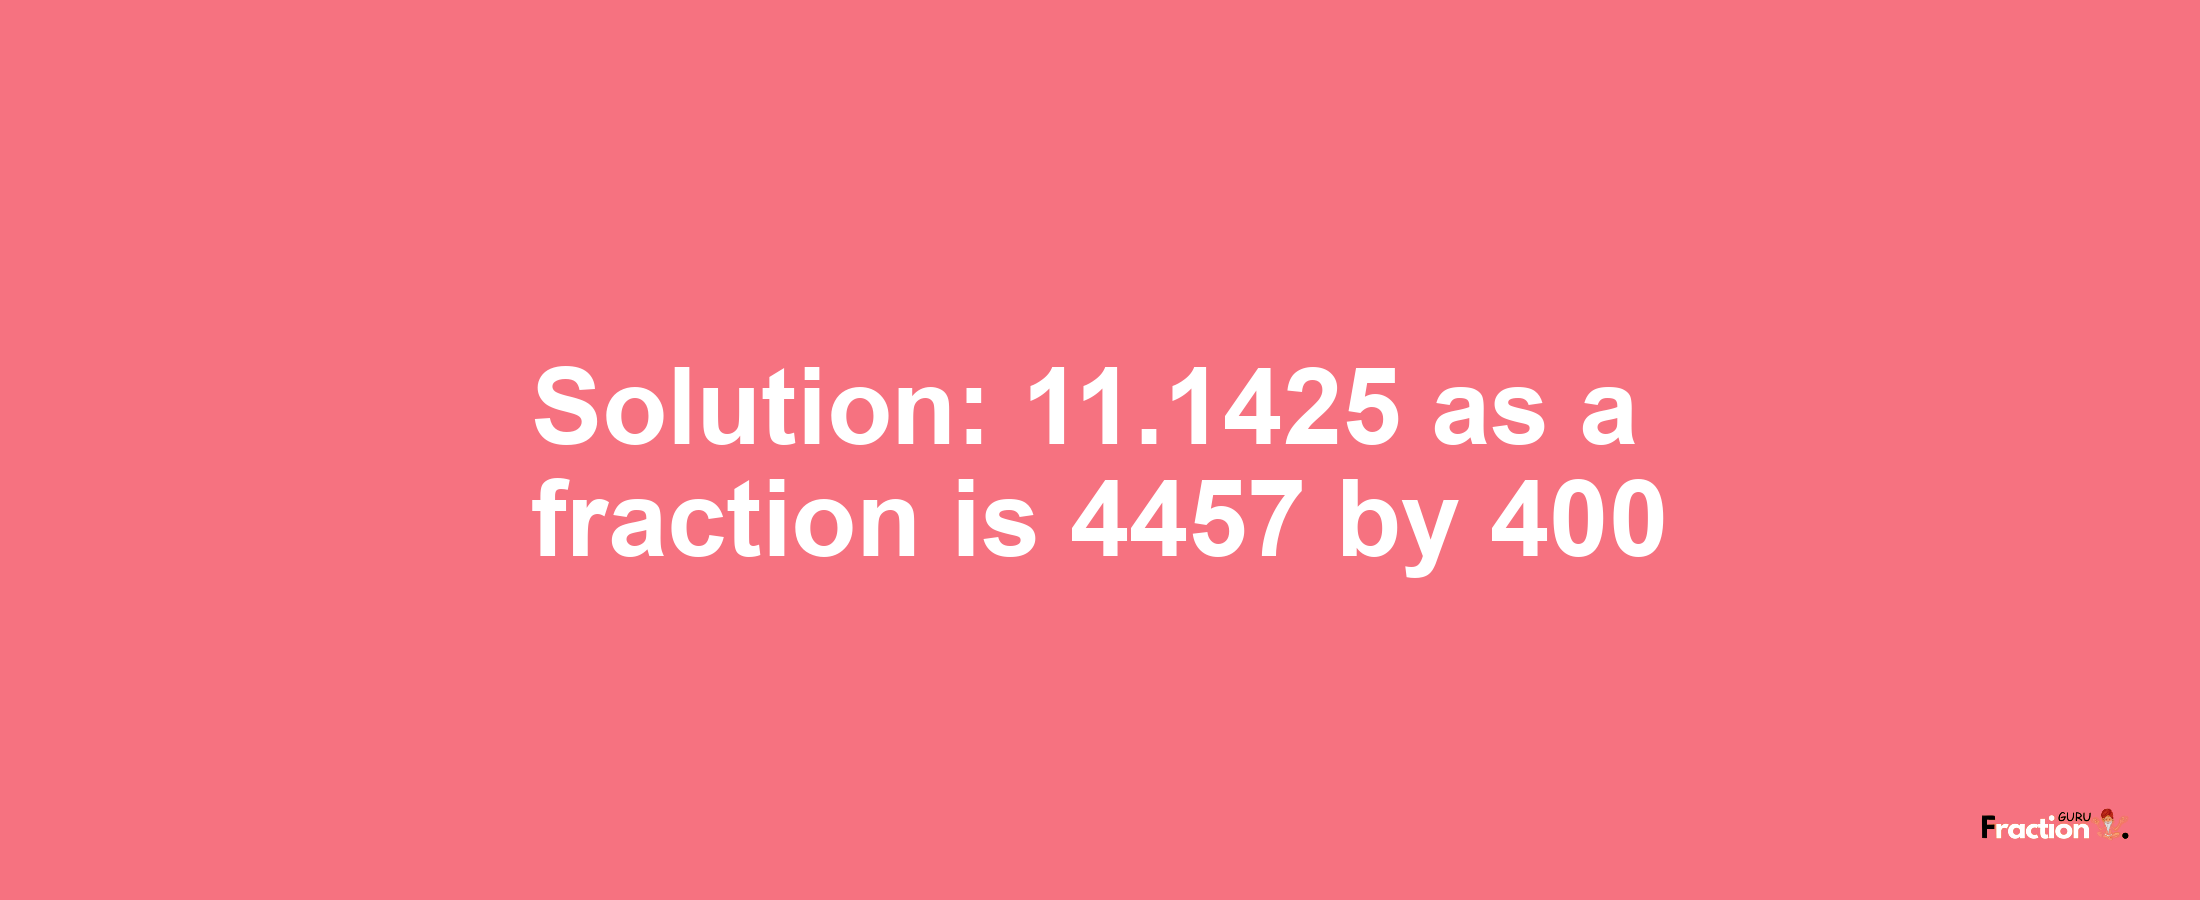 Solution:11.1425 as a fraction is 4457/400